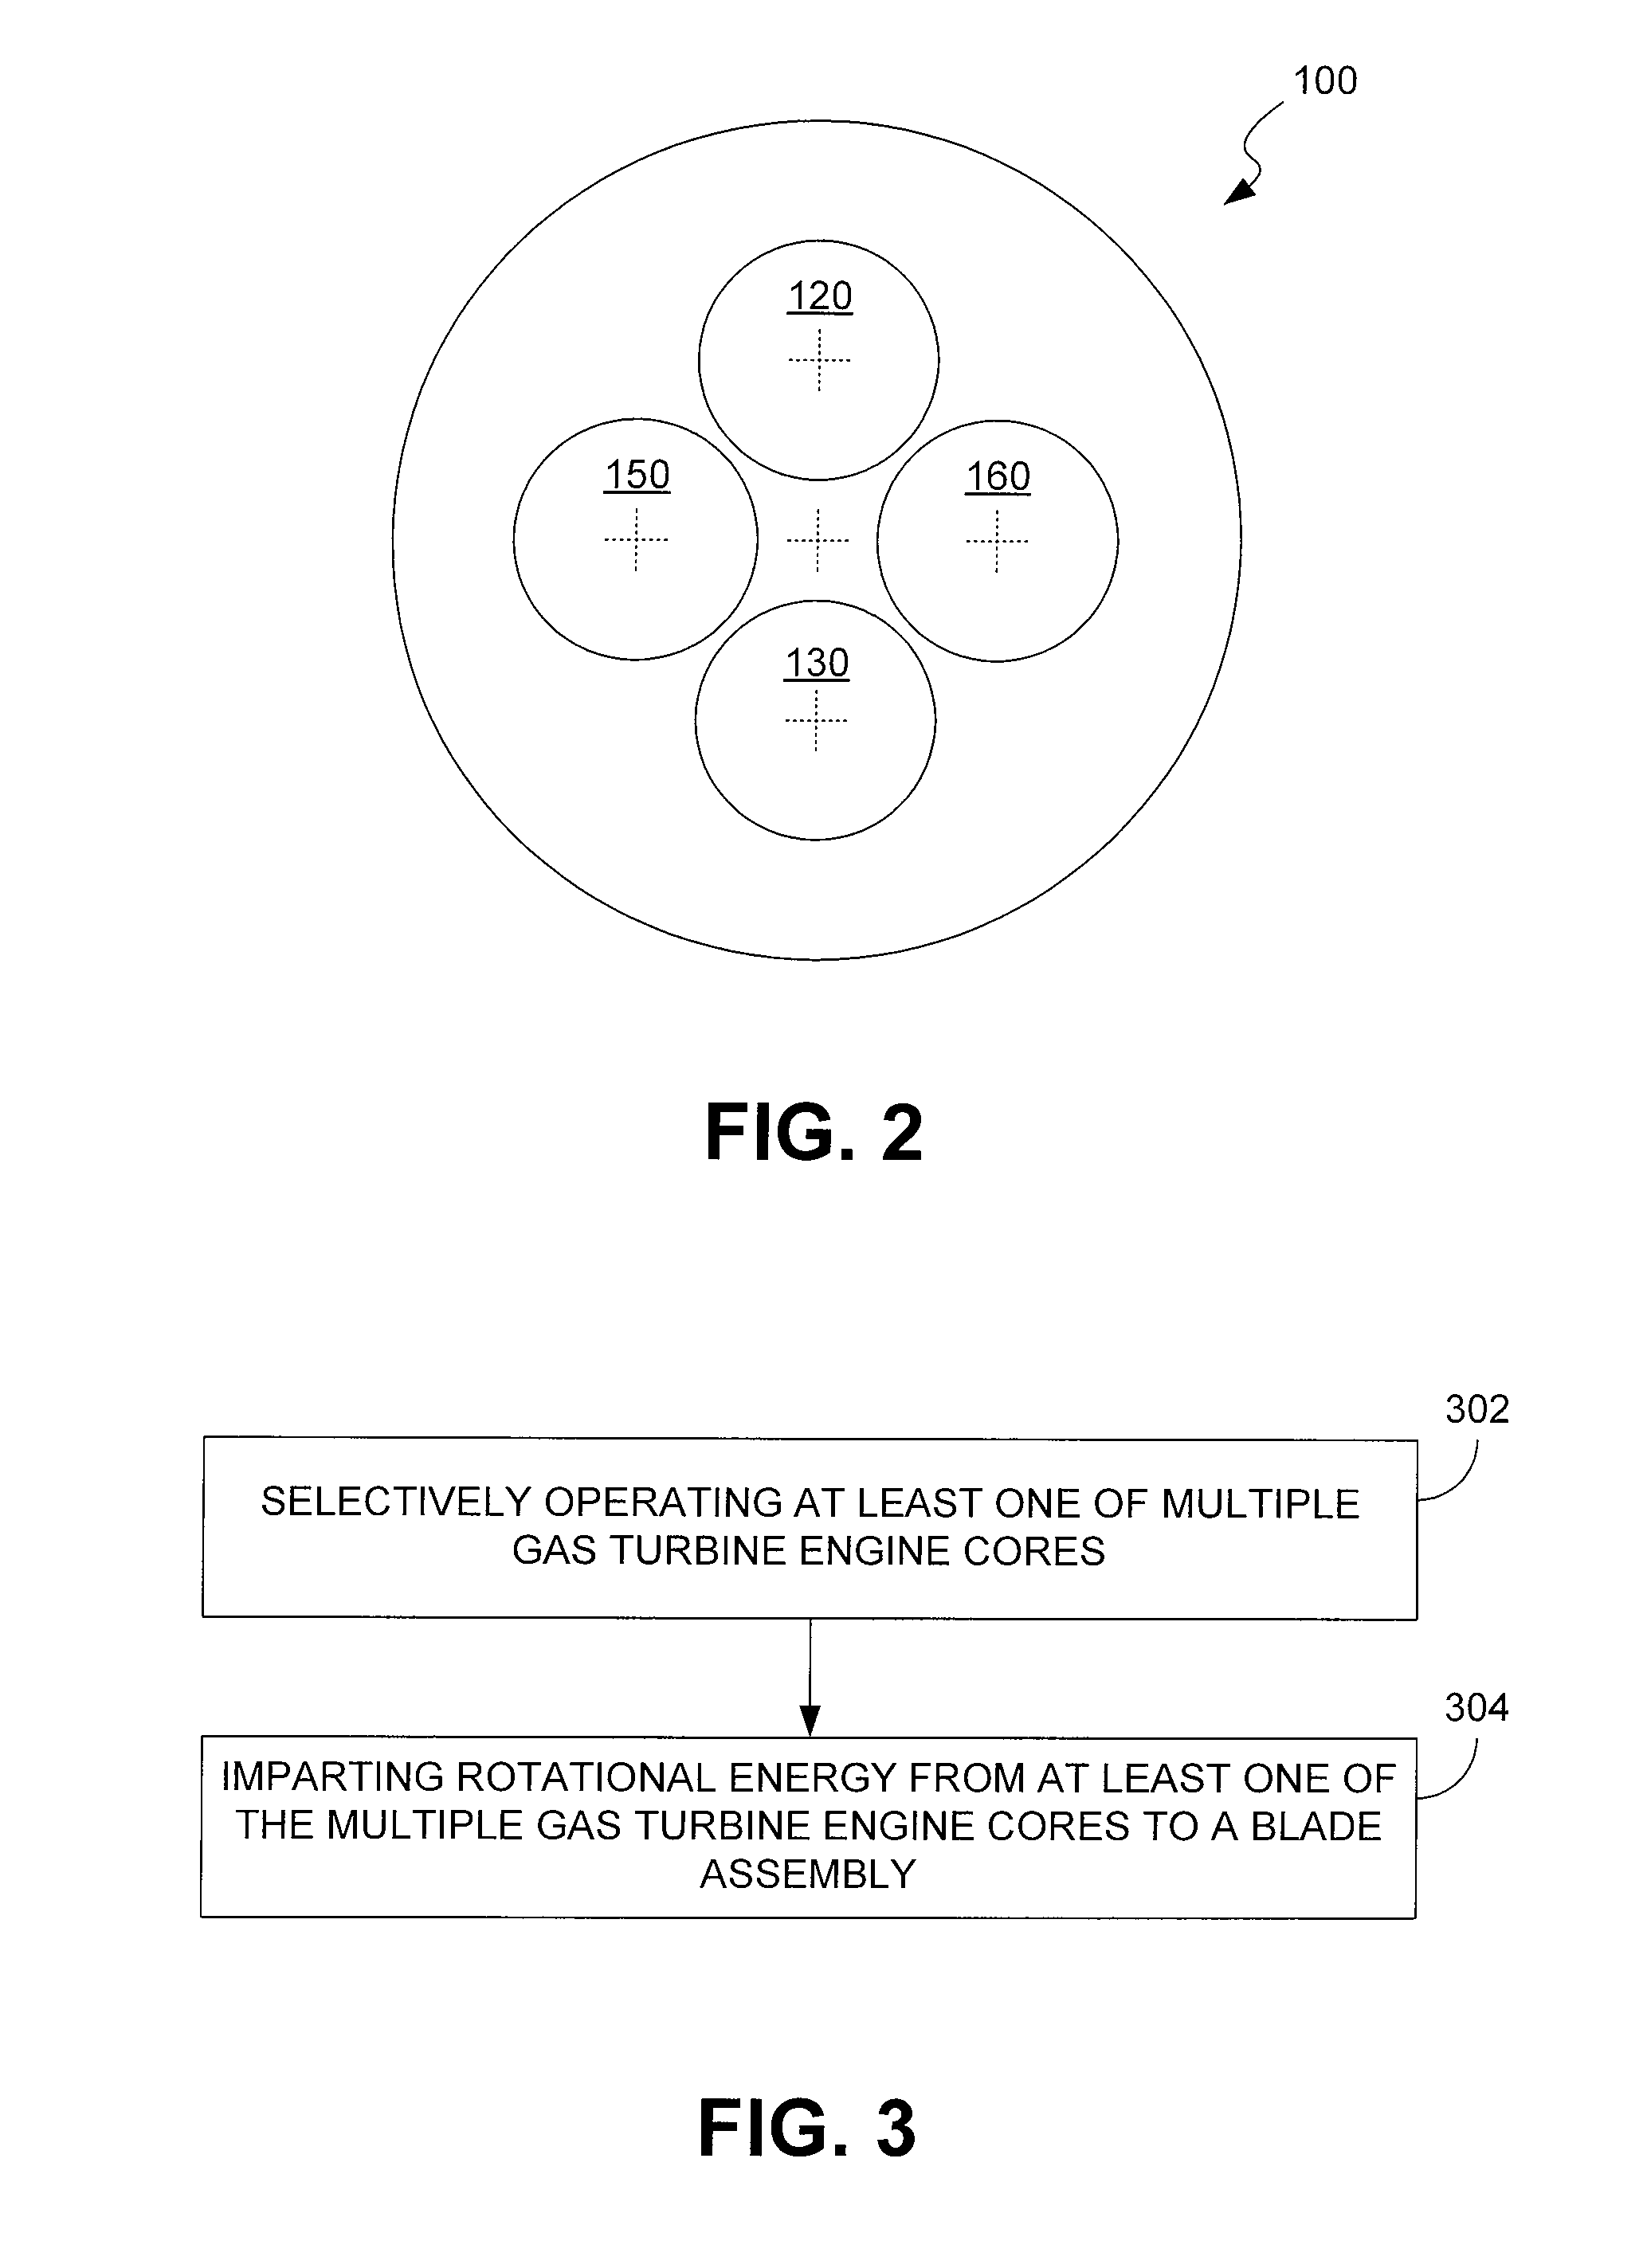 Gas Turbine Engine Systems and Related Methods Involving Multiple Gas Turbine Cores